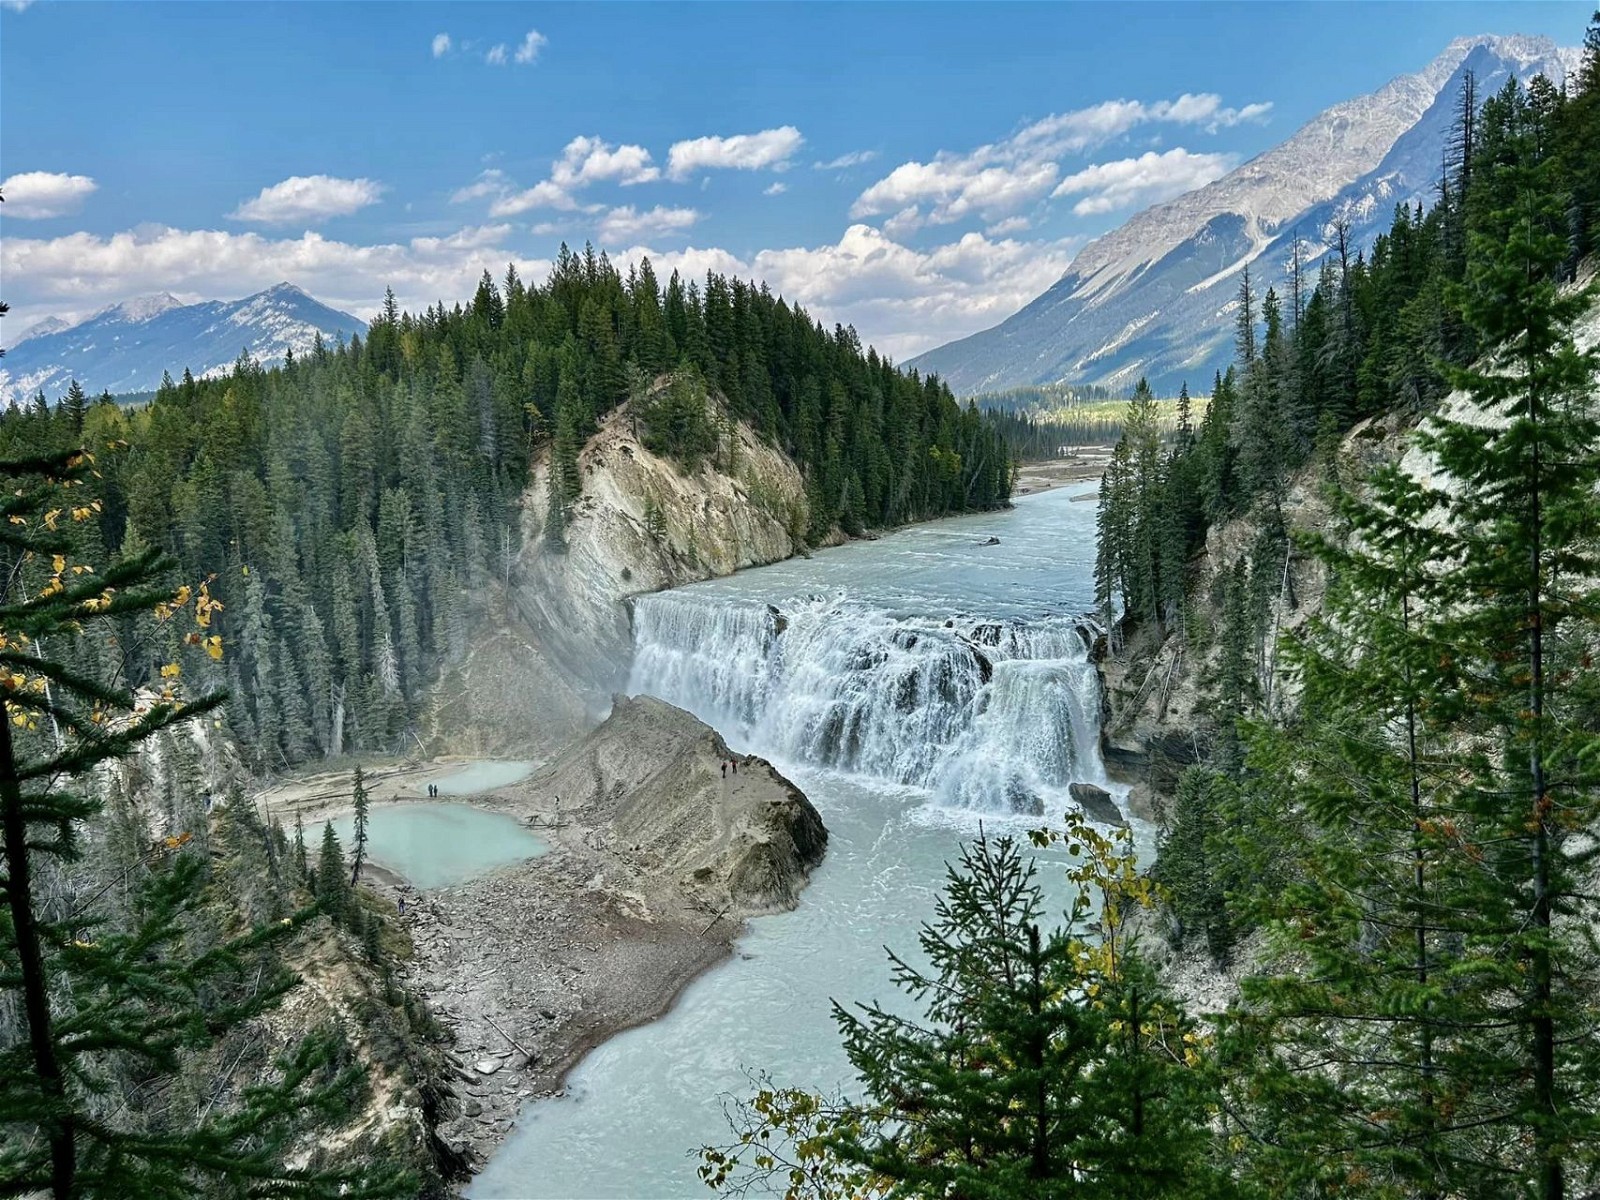 Explore the enchanting beauty of Yoho National Park in the Canadian Rockies. Majestic mountains, pristine lakes, and waterfalls await.